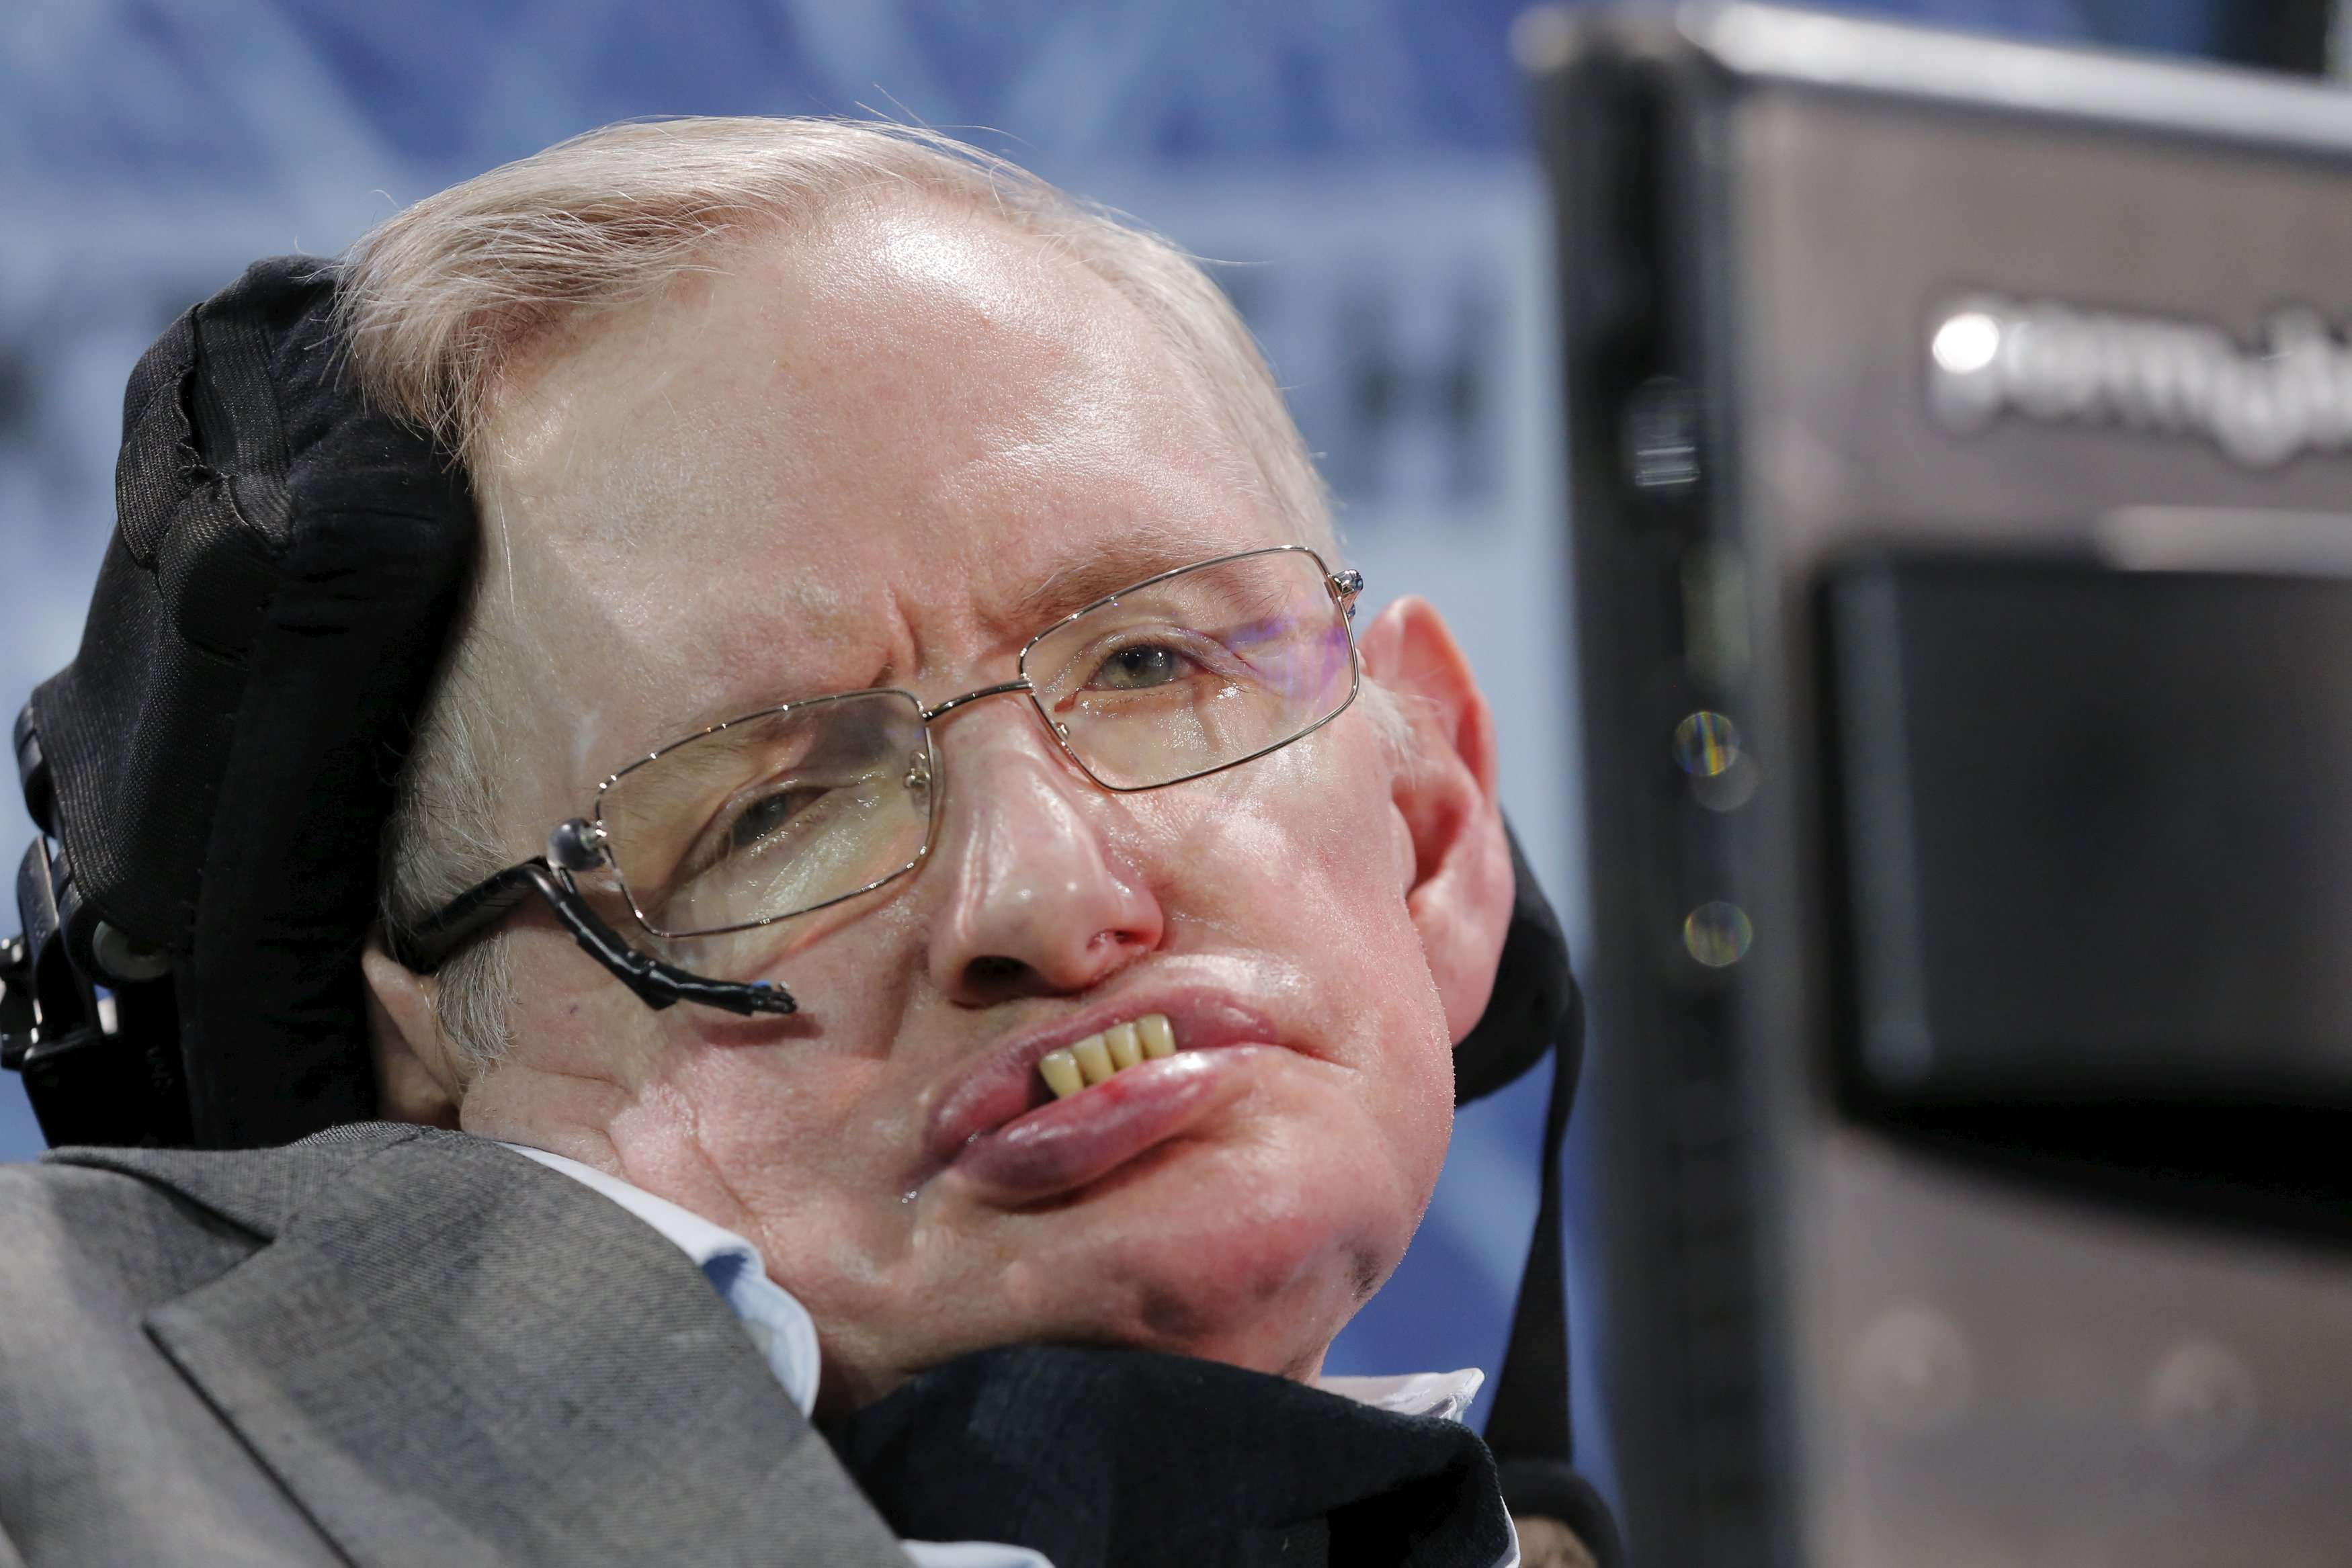 Physicist Stephen Hawking’s Weibo social media account on the mainland has millions of followers. Photo: Reuters